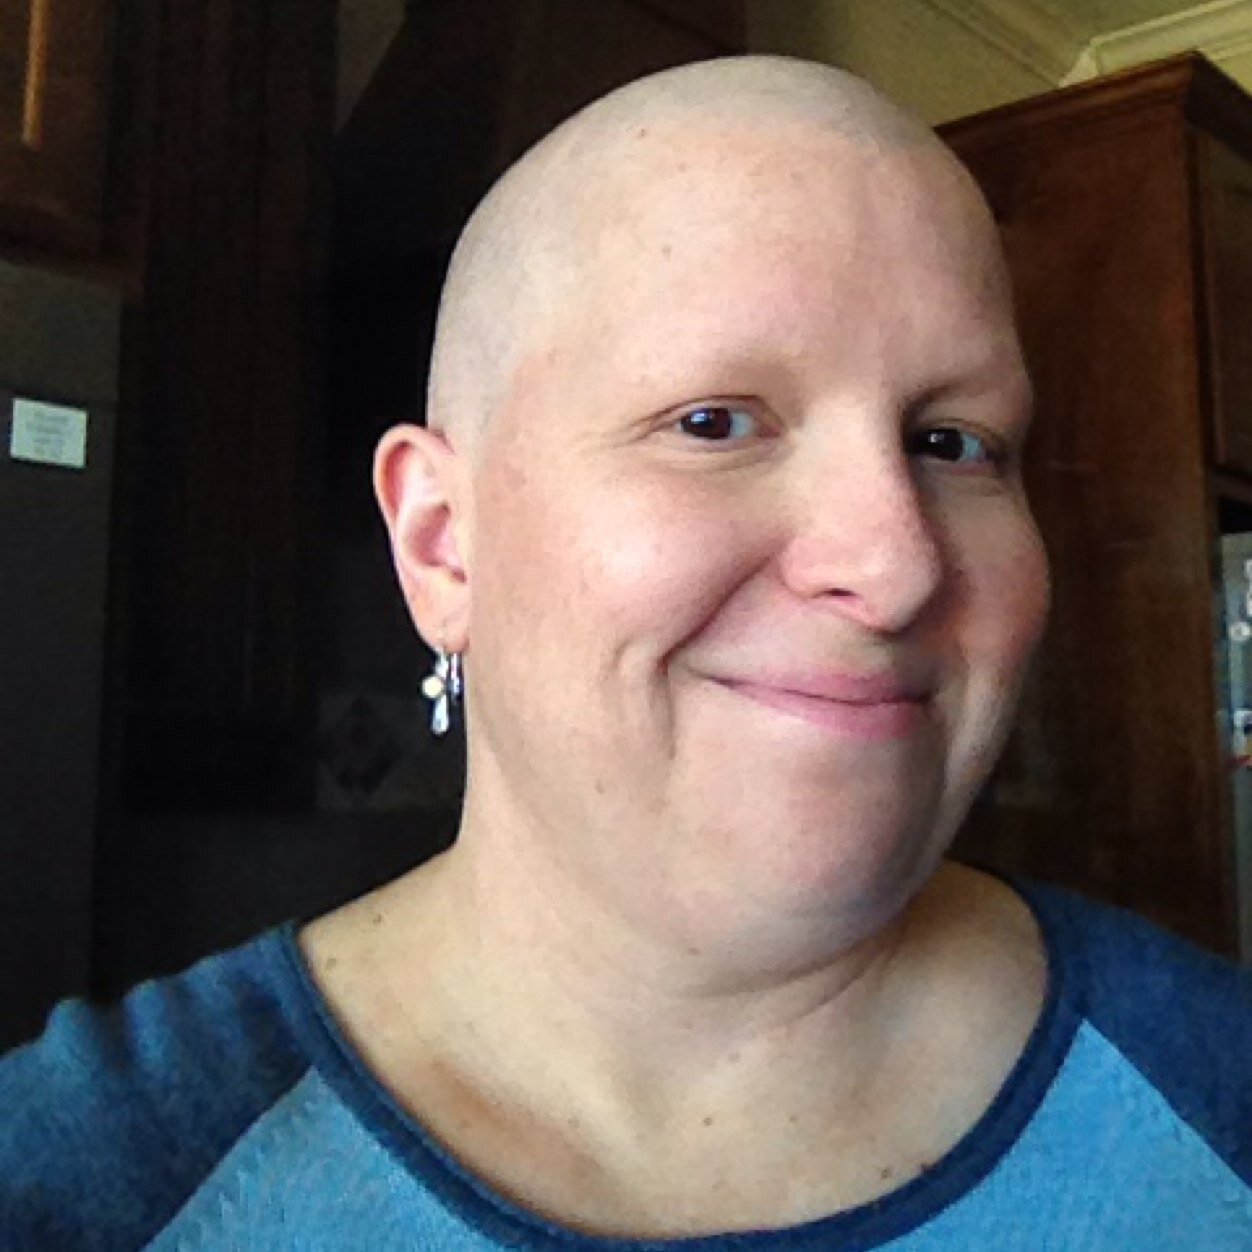 I was diagnosed with breast cancer in 2009, which changed the course of my life. I now live with metastatic breast cancer.